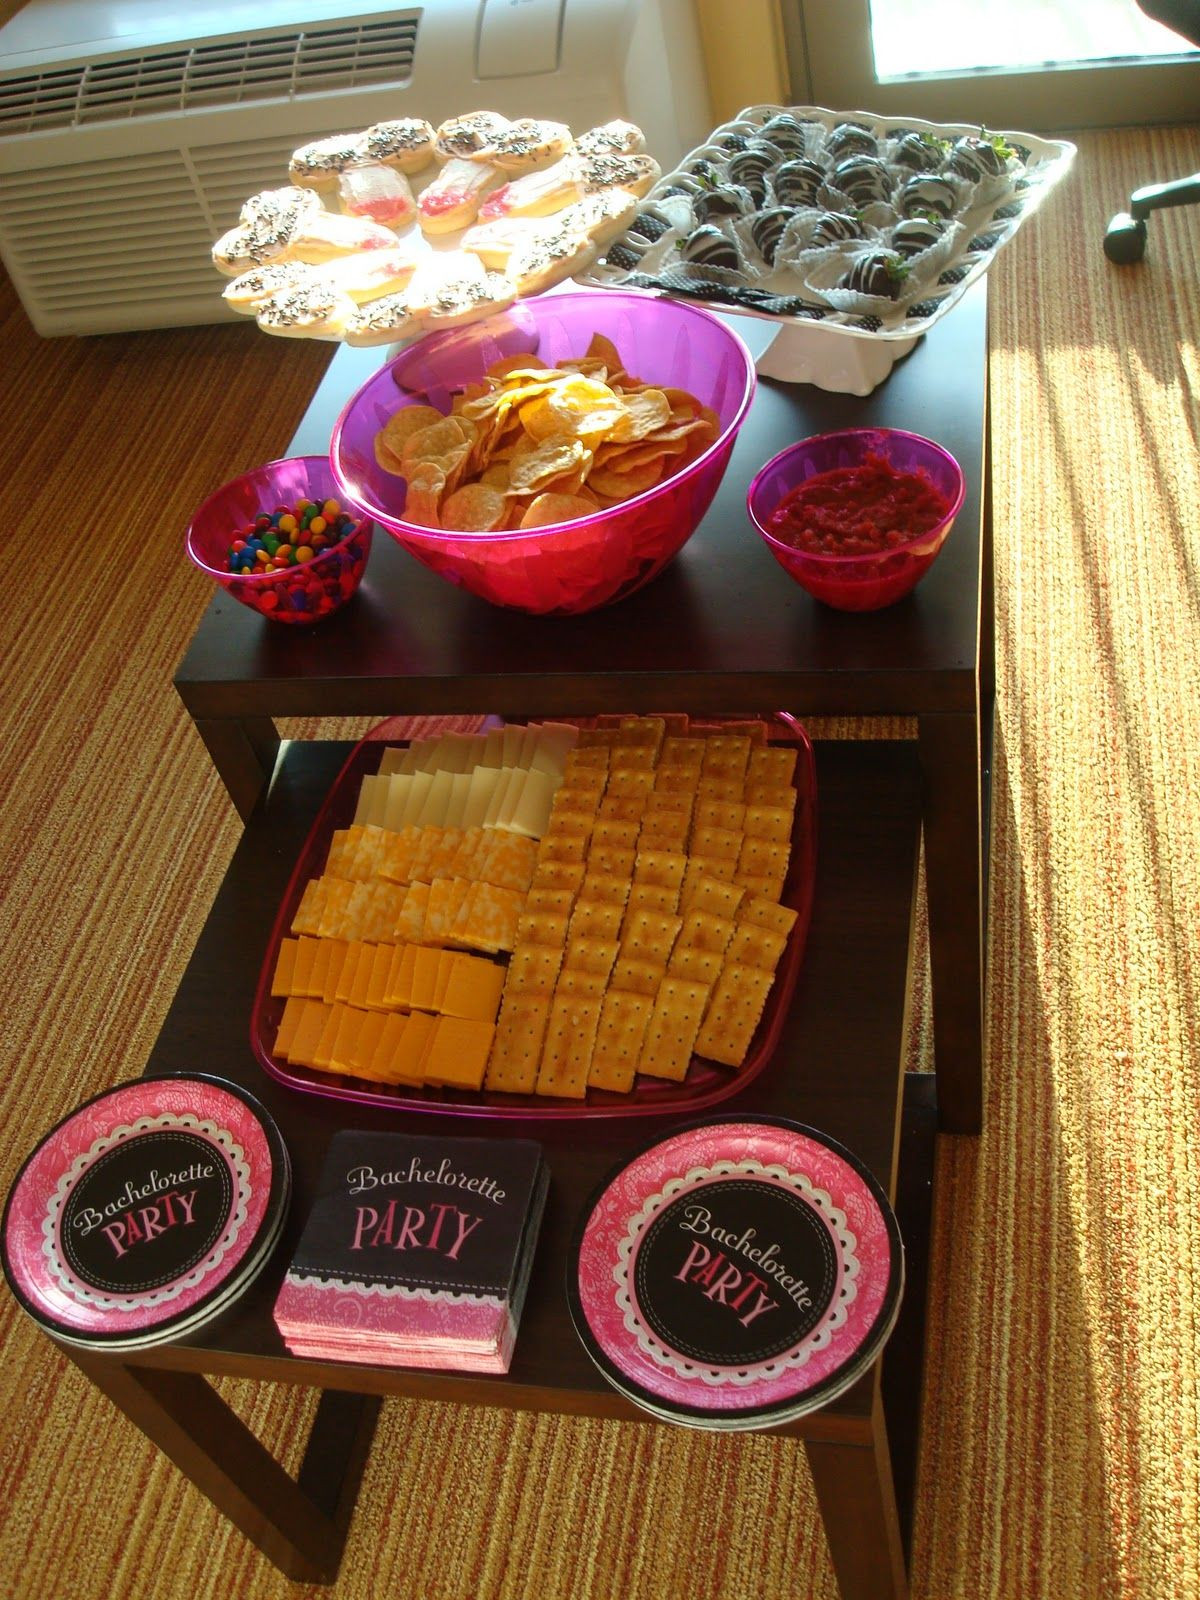 Bachelorette Party Food Ideas
 Bachelorette Party Weekend Hot Pink Black and Silver